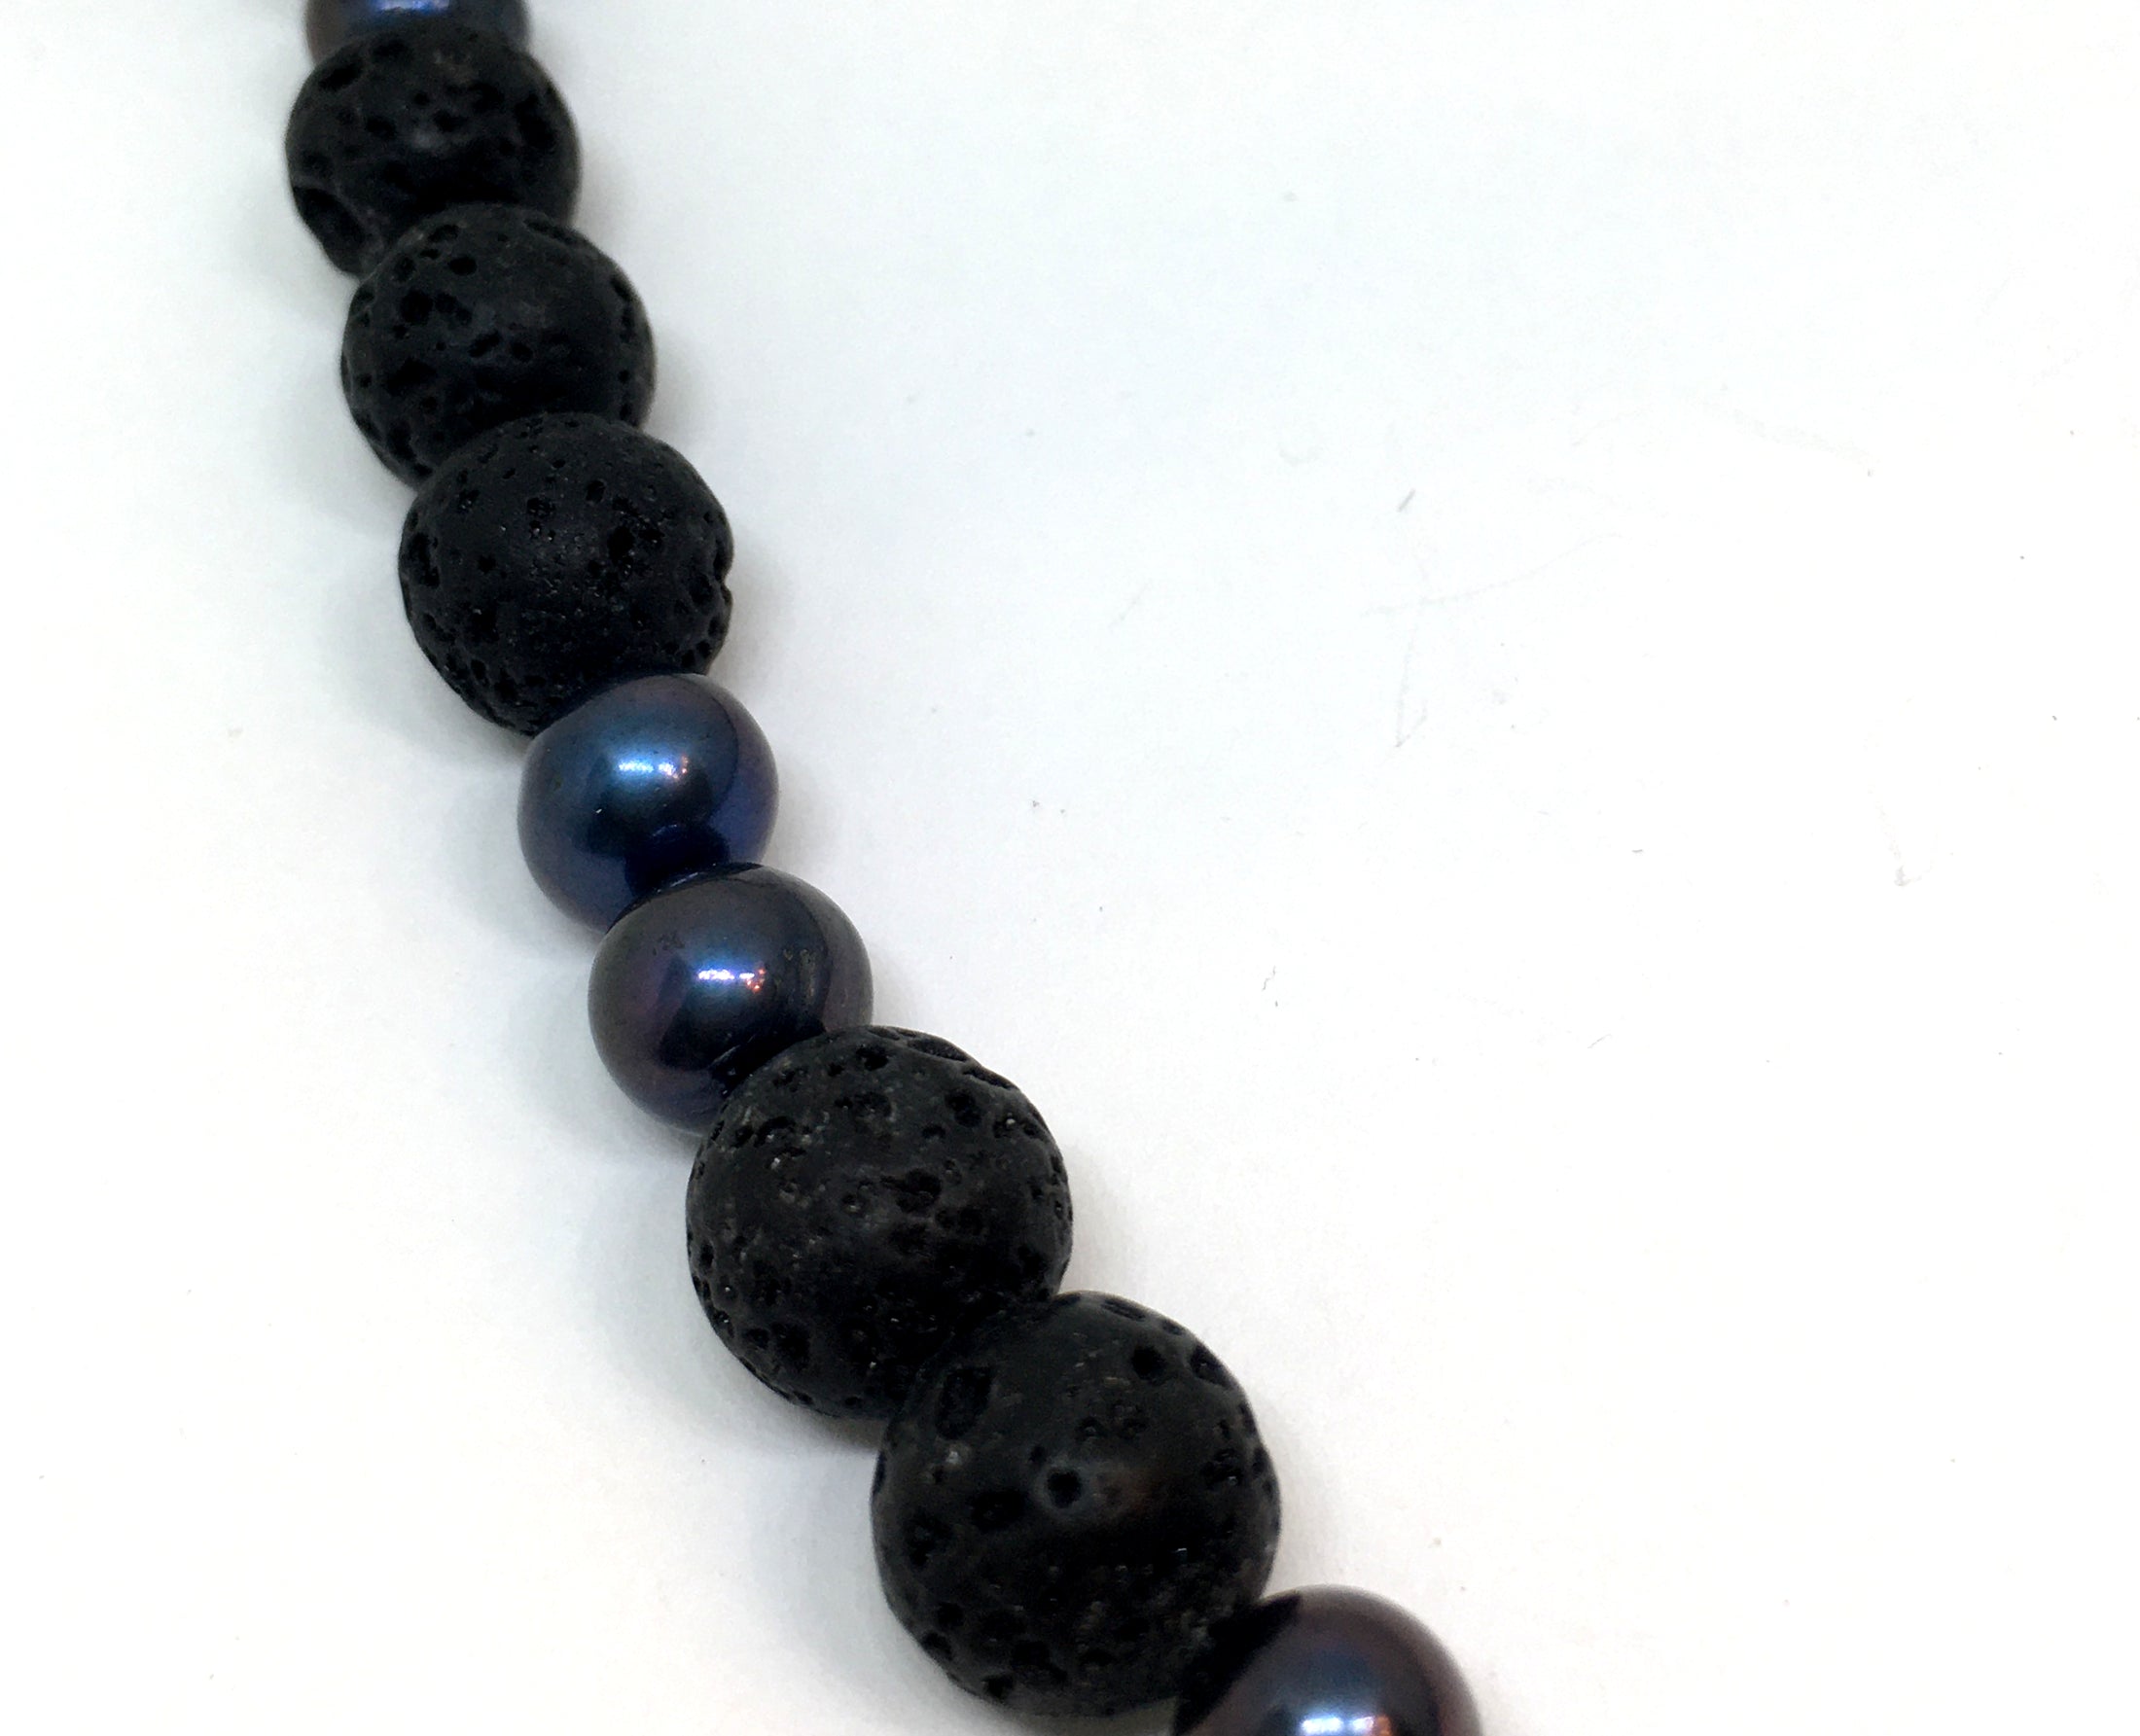 Black Peacock Pearl and Lava Beaded Necklace